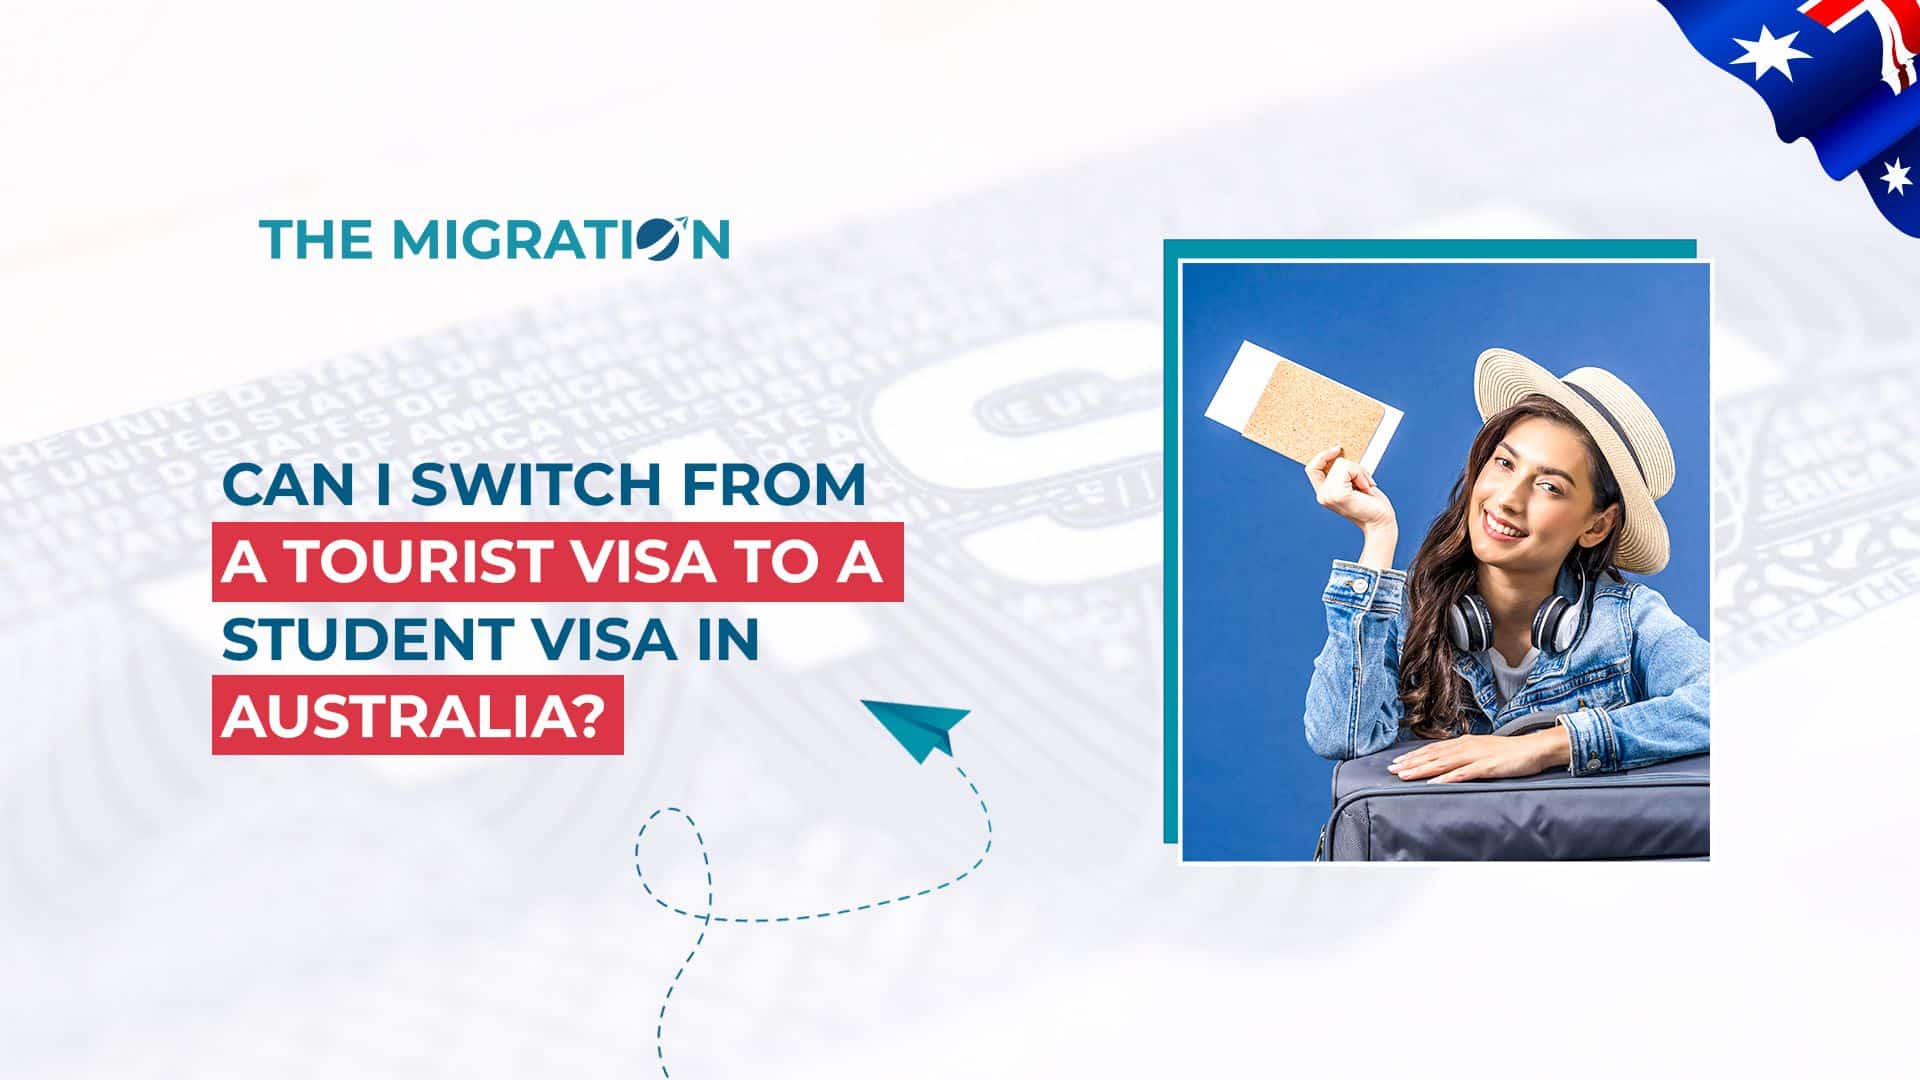 Can I Switch from A Tourist Visa to a Student Visa in Australia